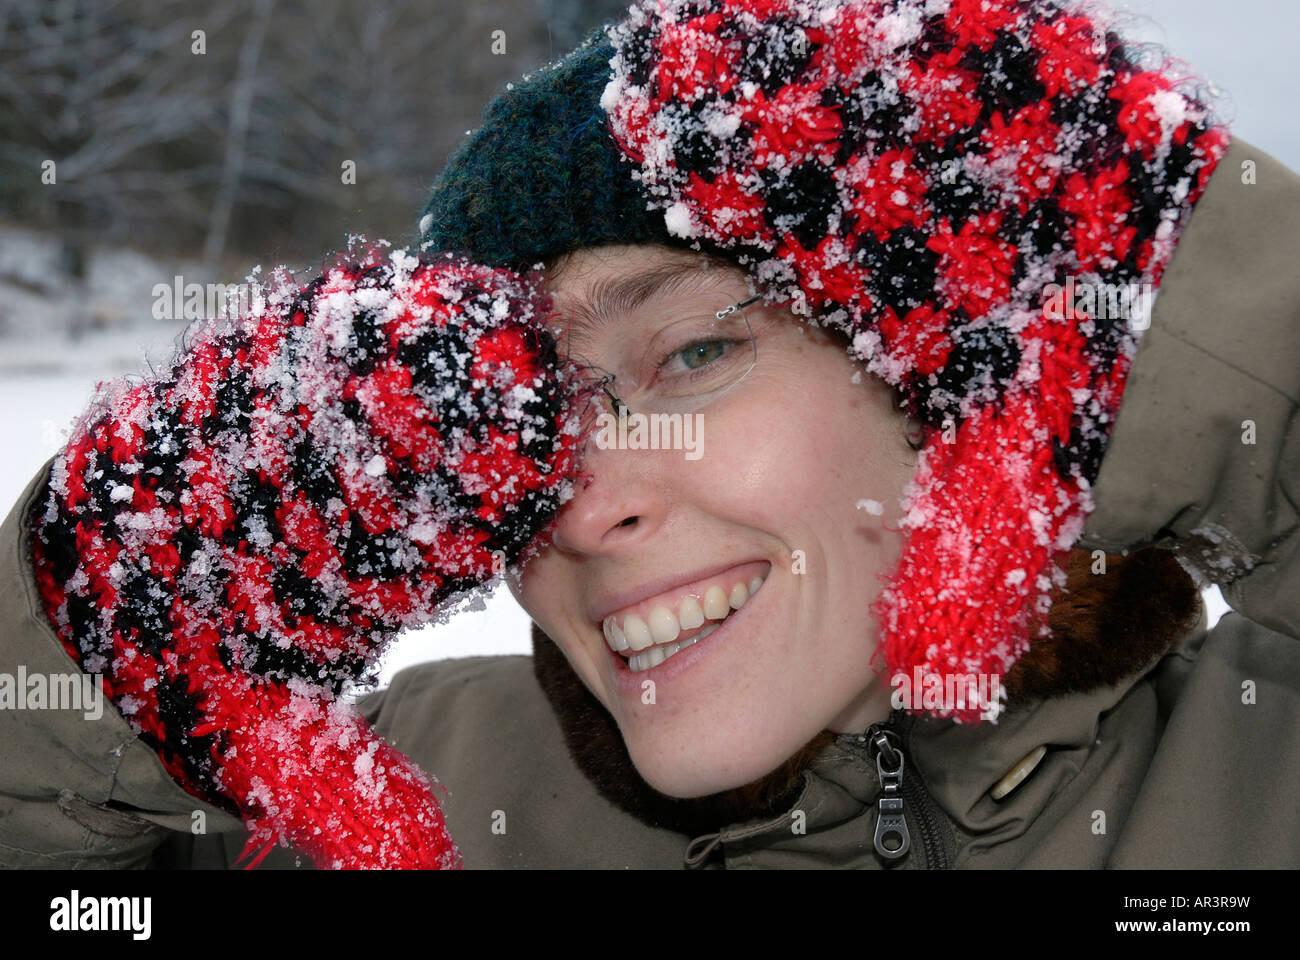 Woman showing her snow-covered mittens Stock Photo